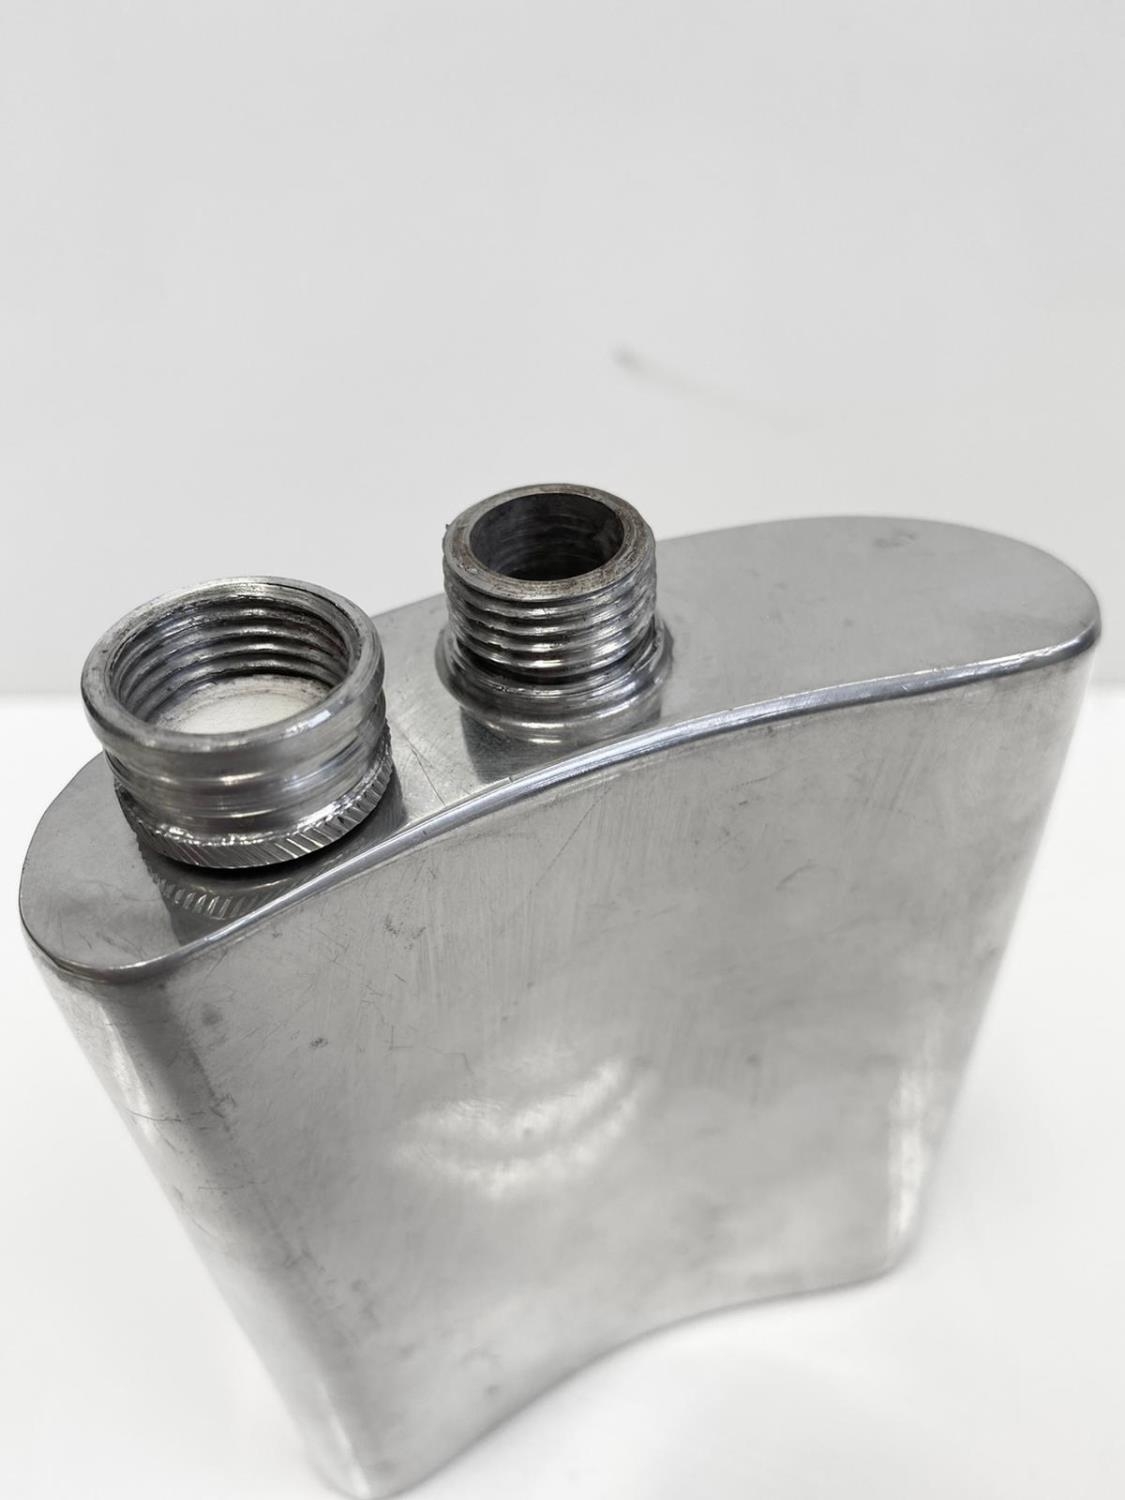 Pewter hip flask. Size 15cm x 8cm. - Image 3 of 3